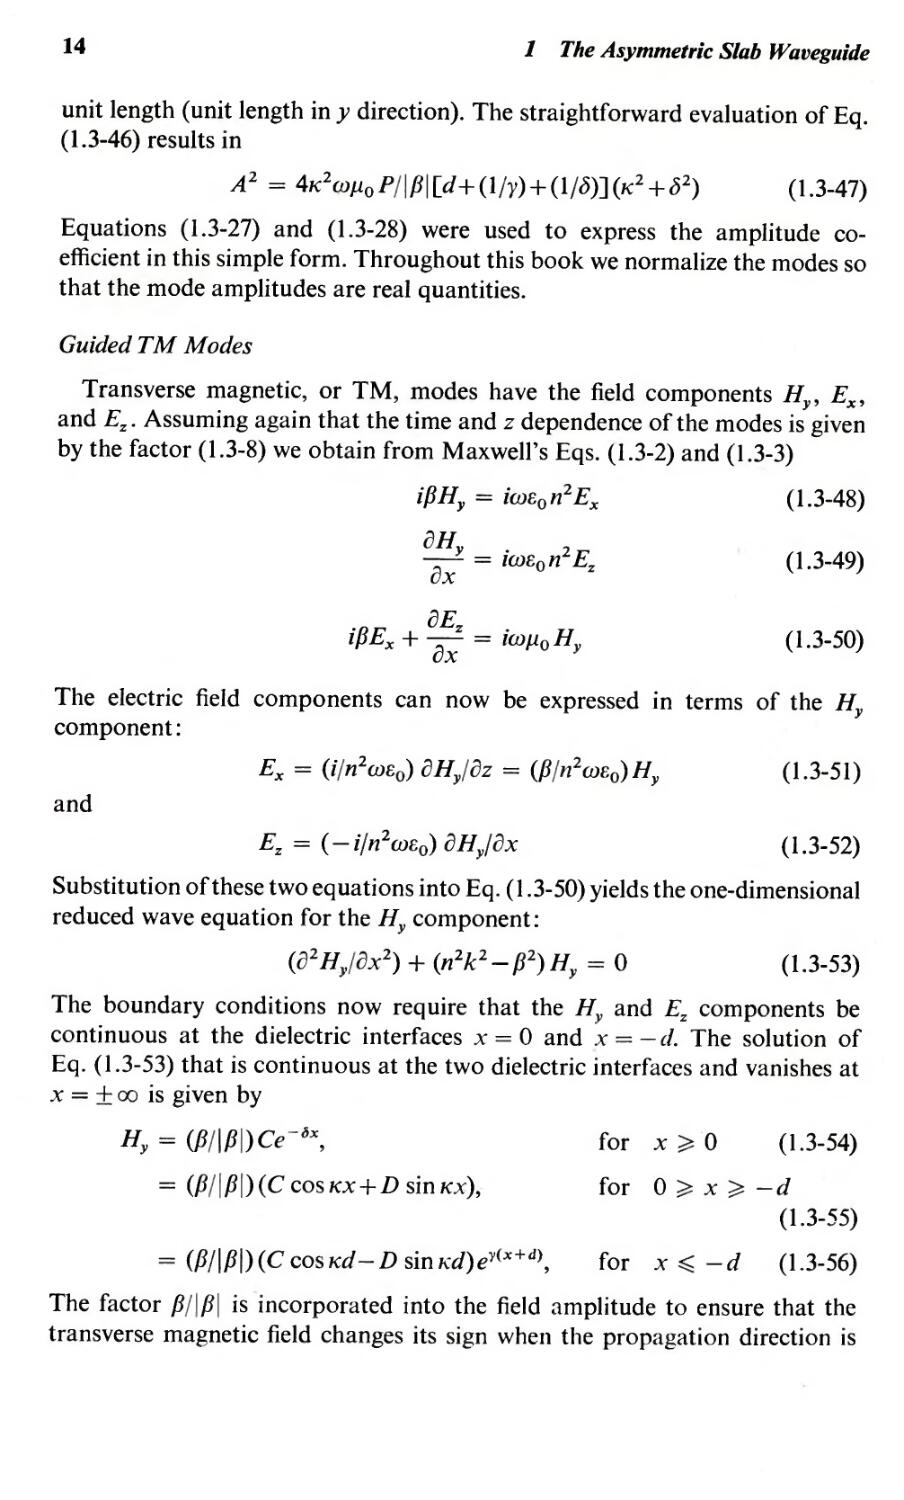 Amplitude coefficient guided TE modes, 14
14
Guided TM modes, 14
14
--- guided, 14
14